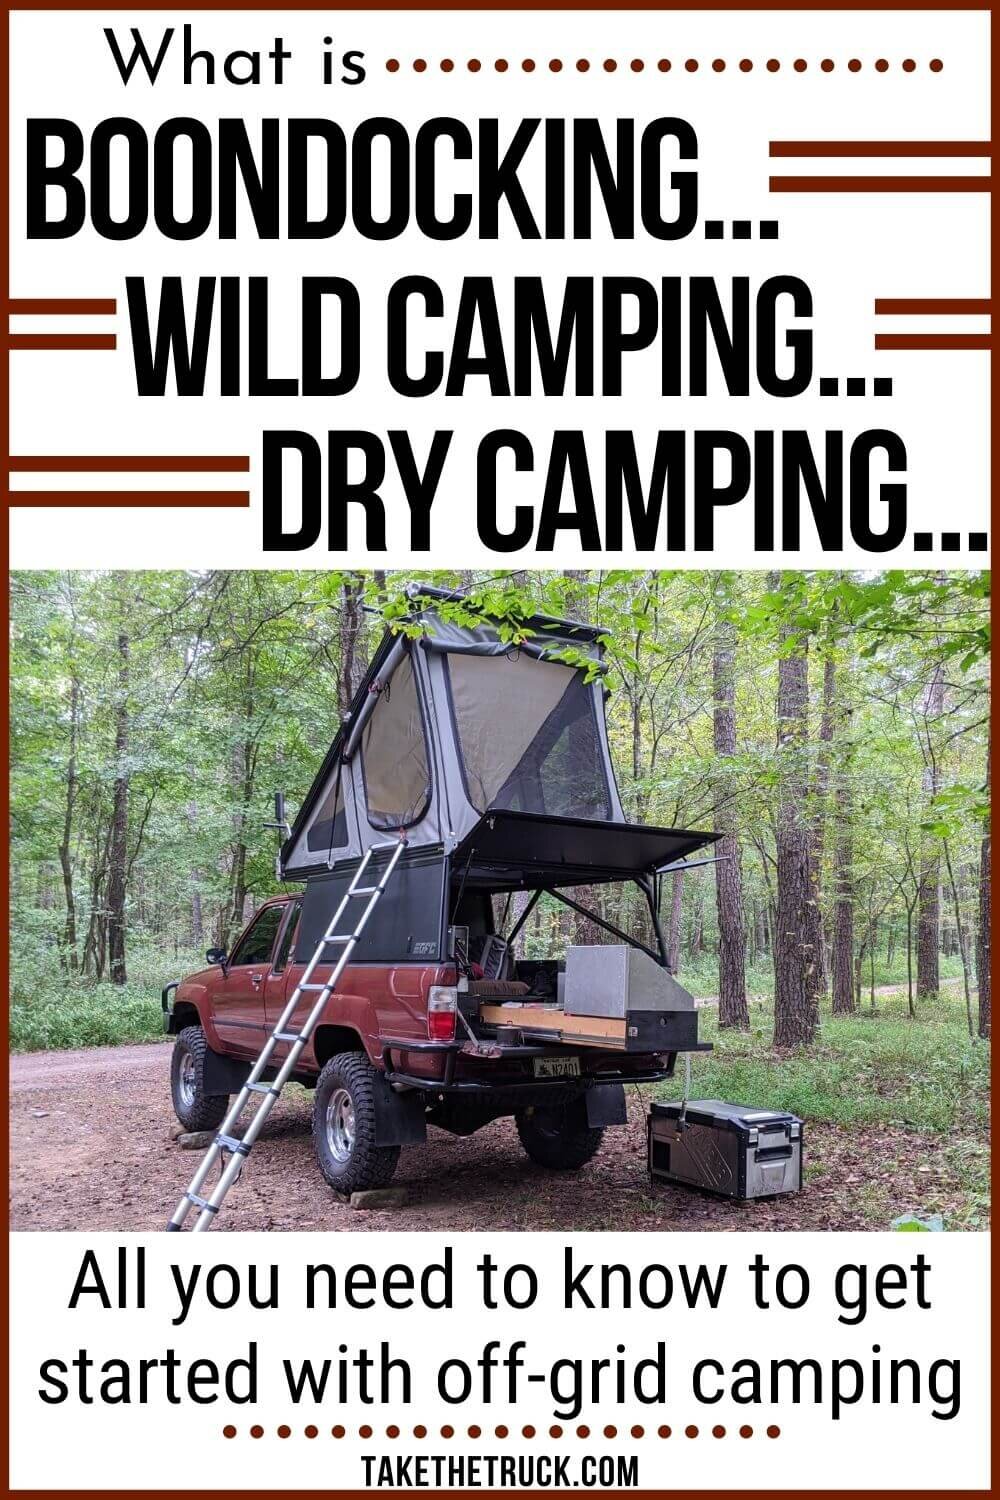 If you’ve never gone primitive camping off grid and don’t think you know how, read this post! It’s full of boondocking and wild camping tips, gear, and ideas to make wild camping comfortable.